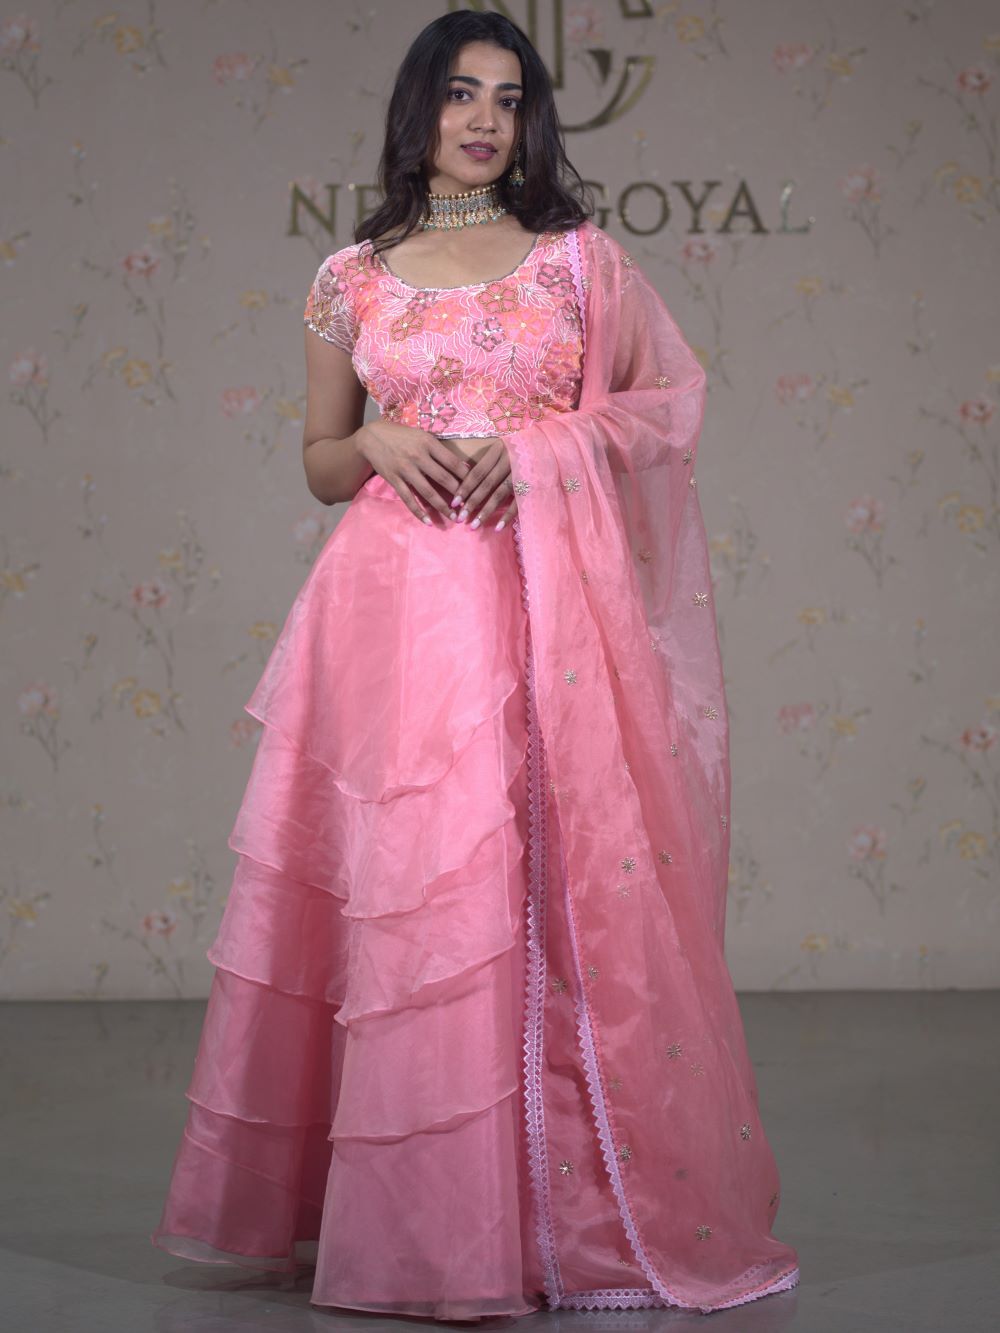 Pearl pink 4 layered lehenga paired with embroidered blouse